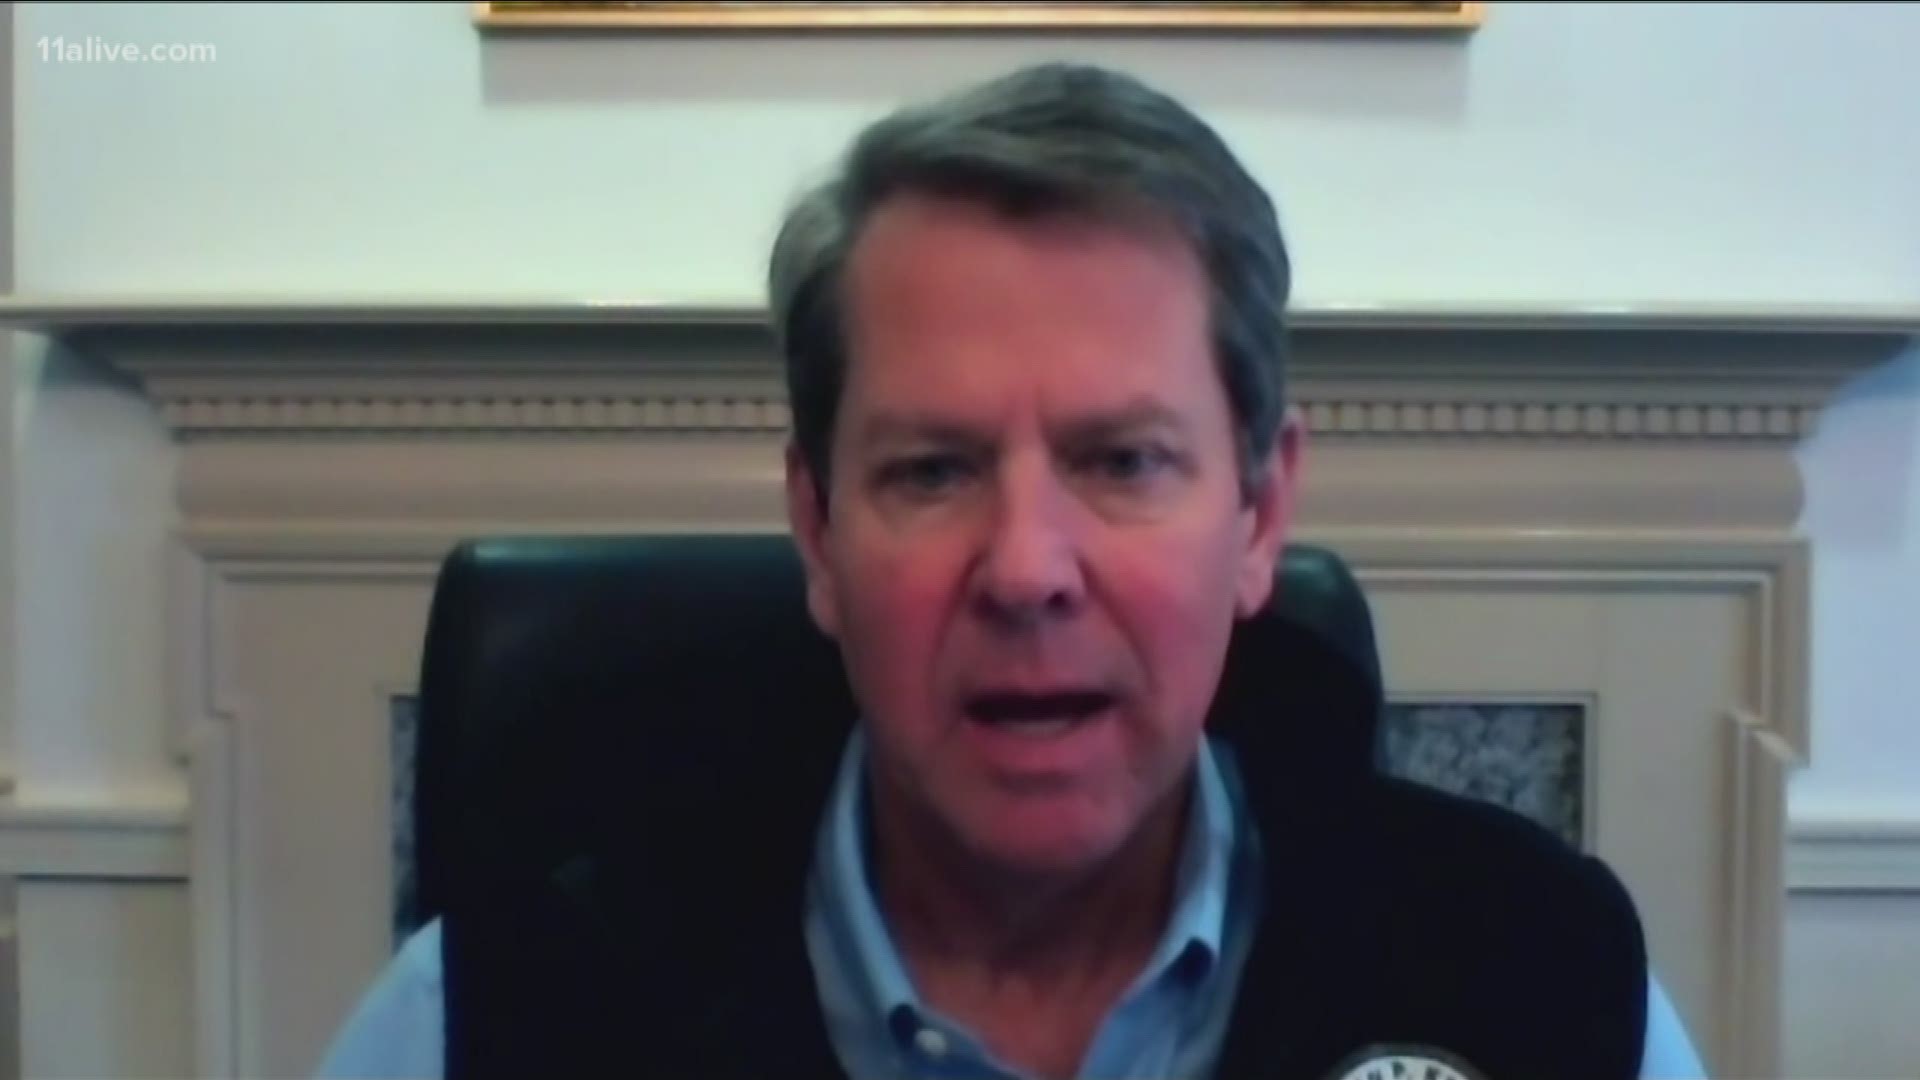 Georgia Governor Brian Kemp's office said his statement is based on the unavailability of tests early-on as the virus spread.